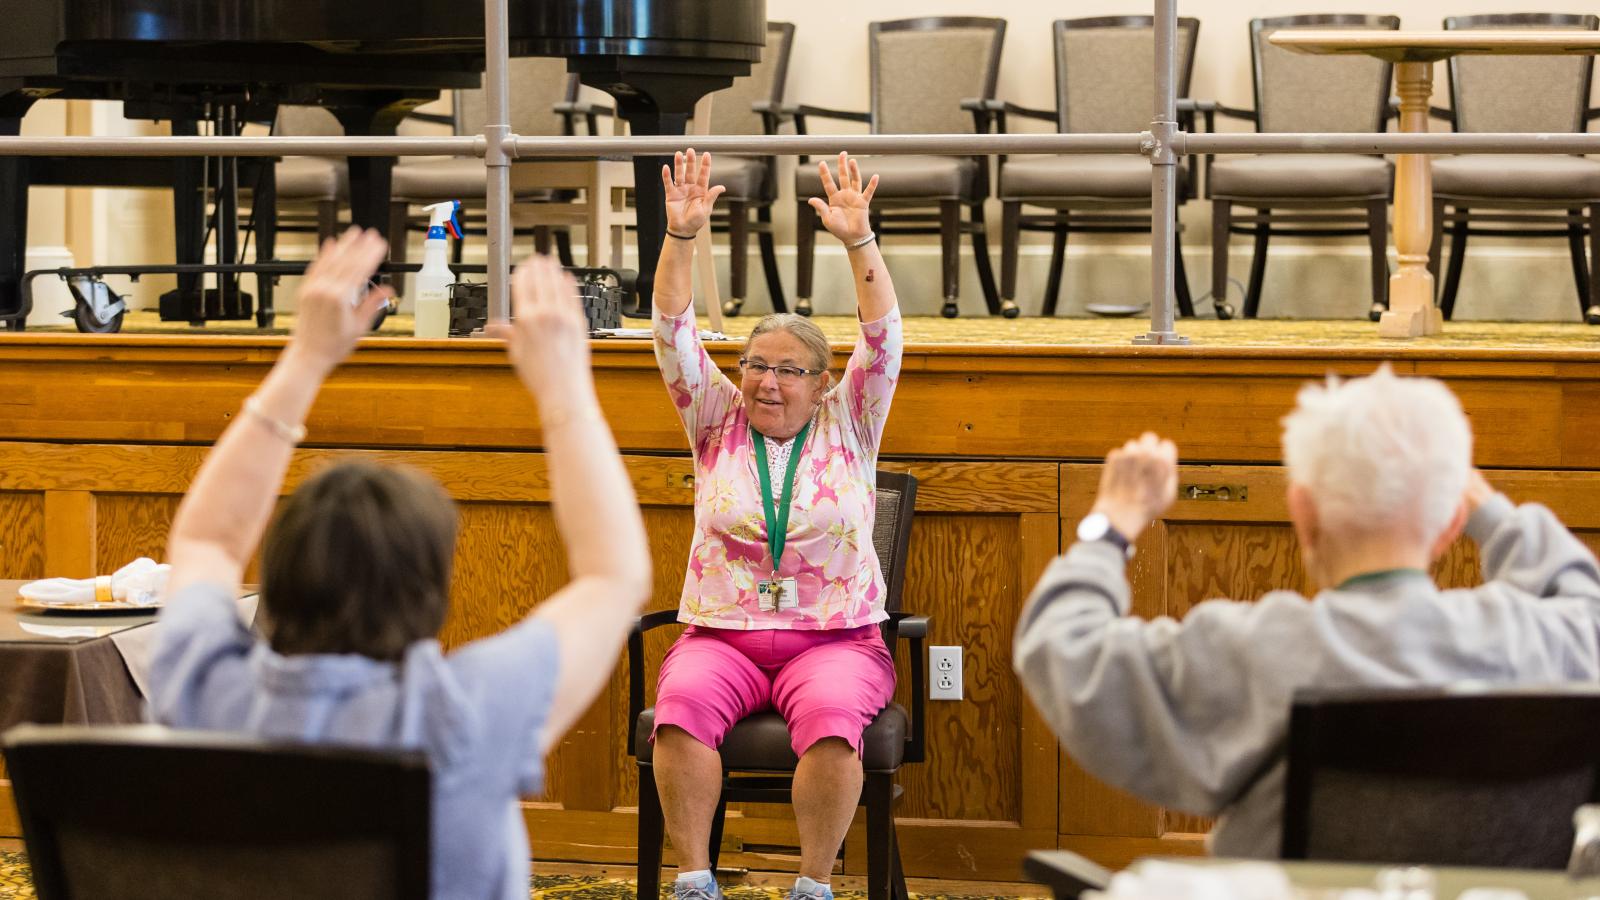 Seated woman leading group exercise class for seniors. 